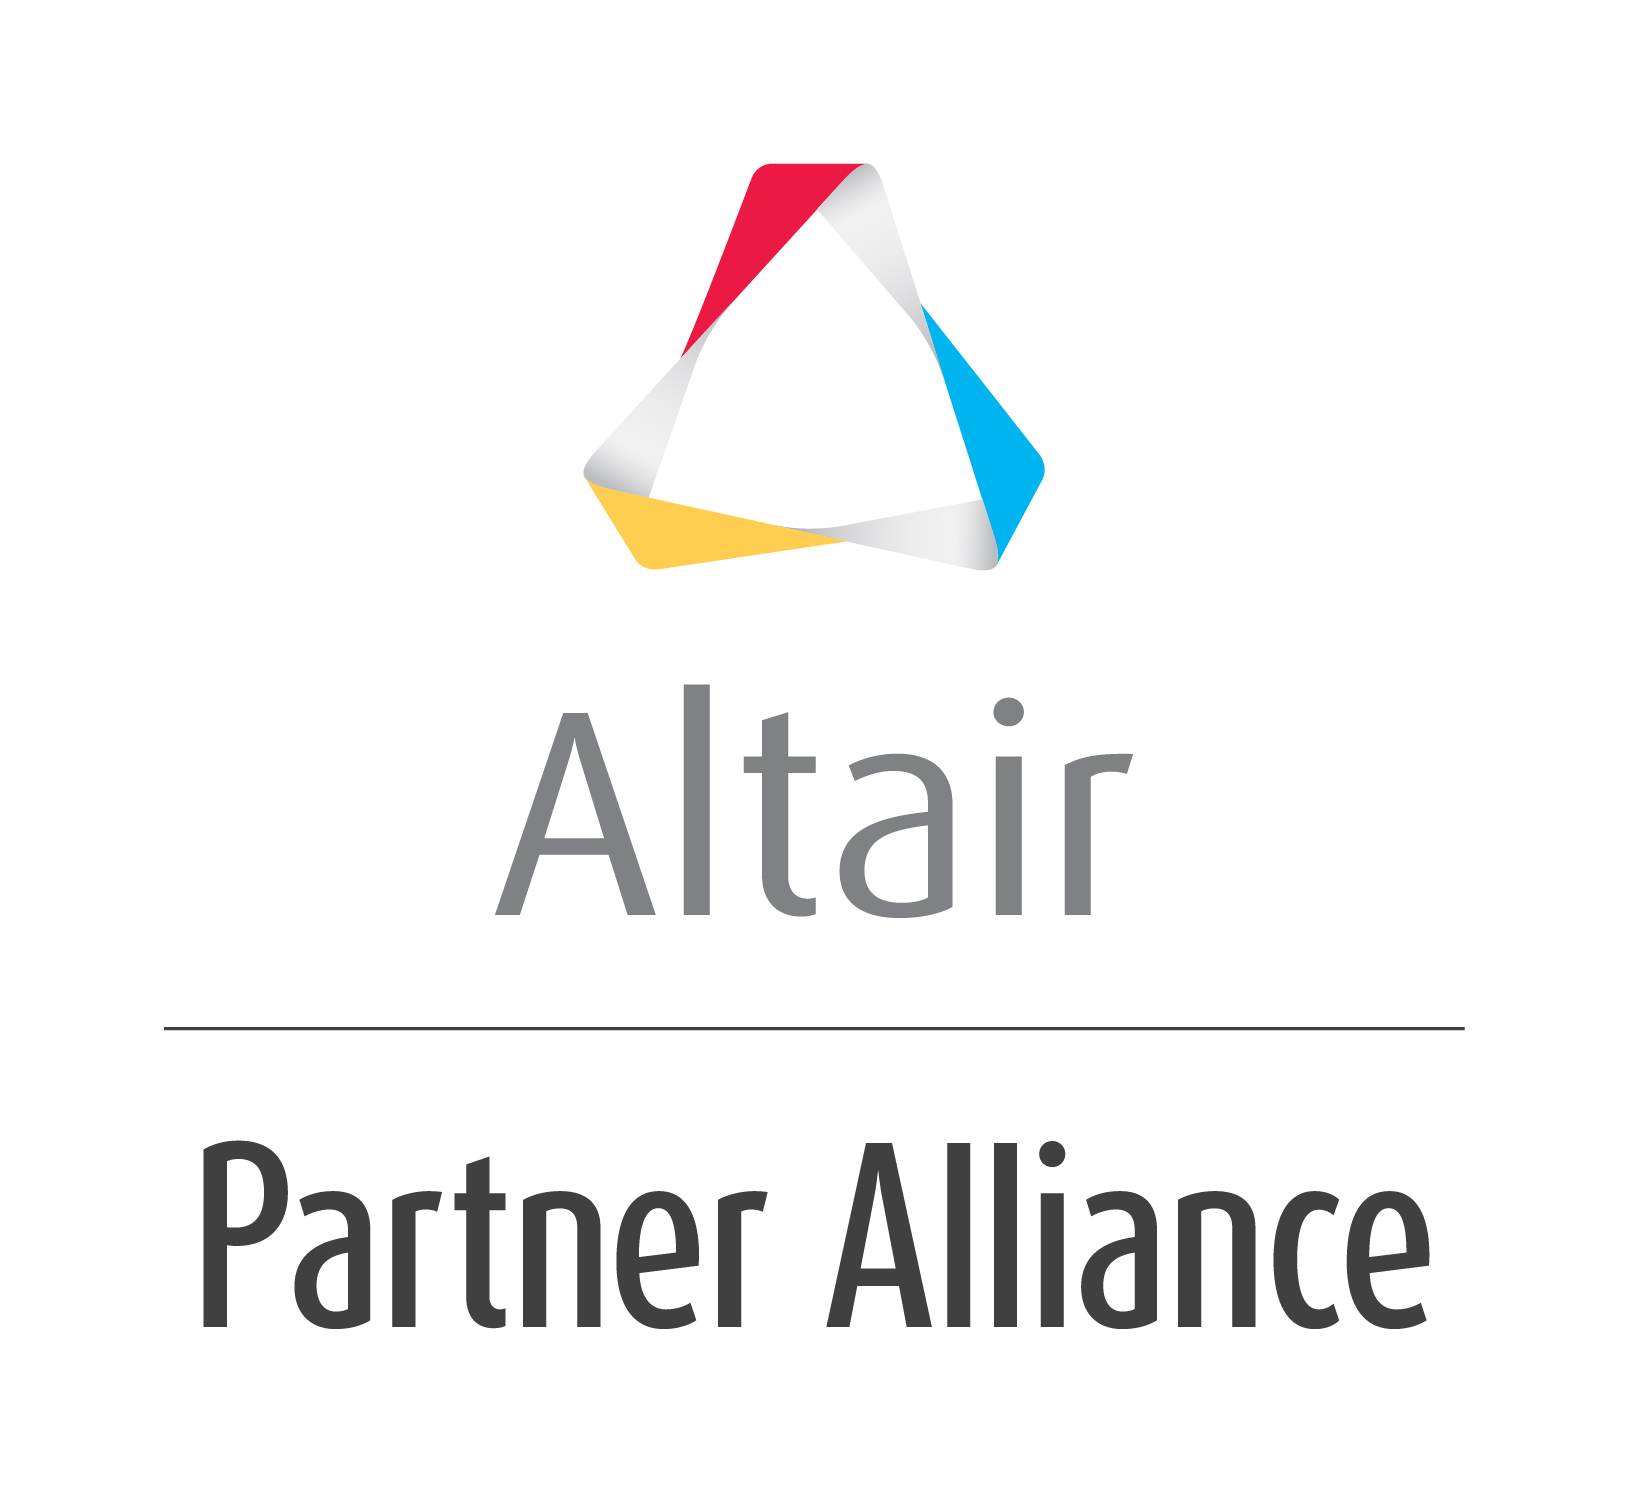 About Altair Partner Alliance